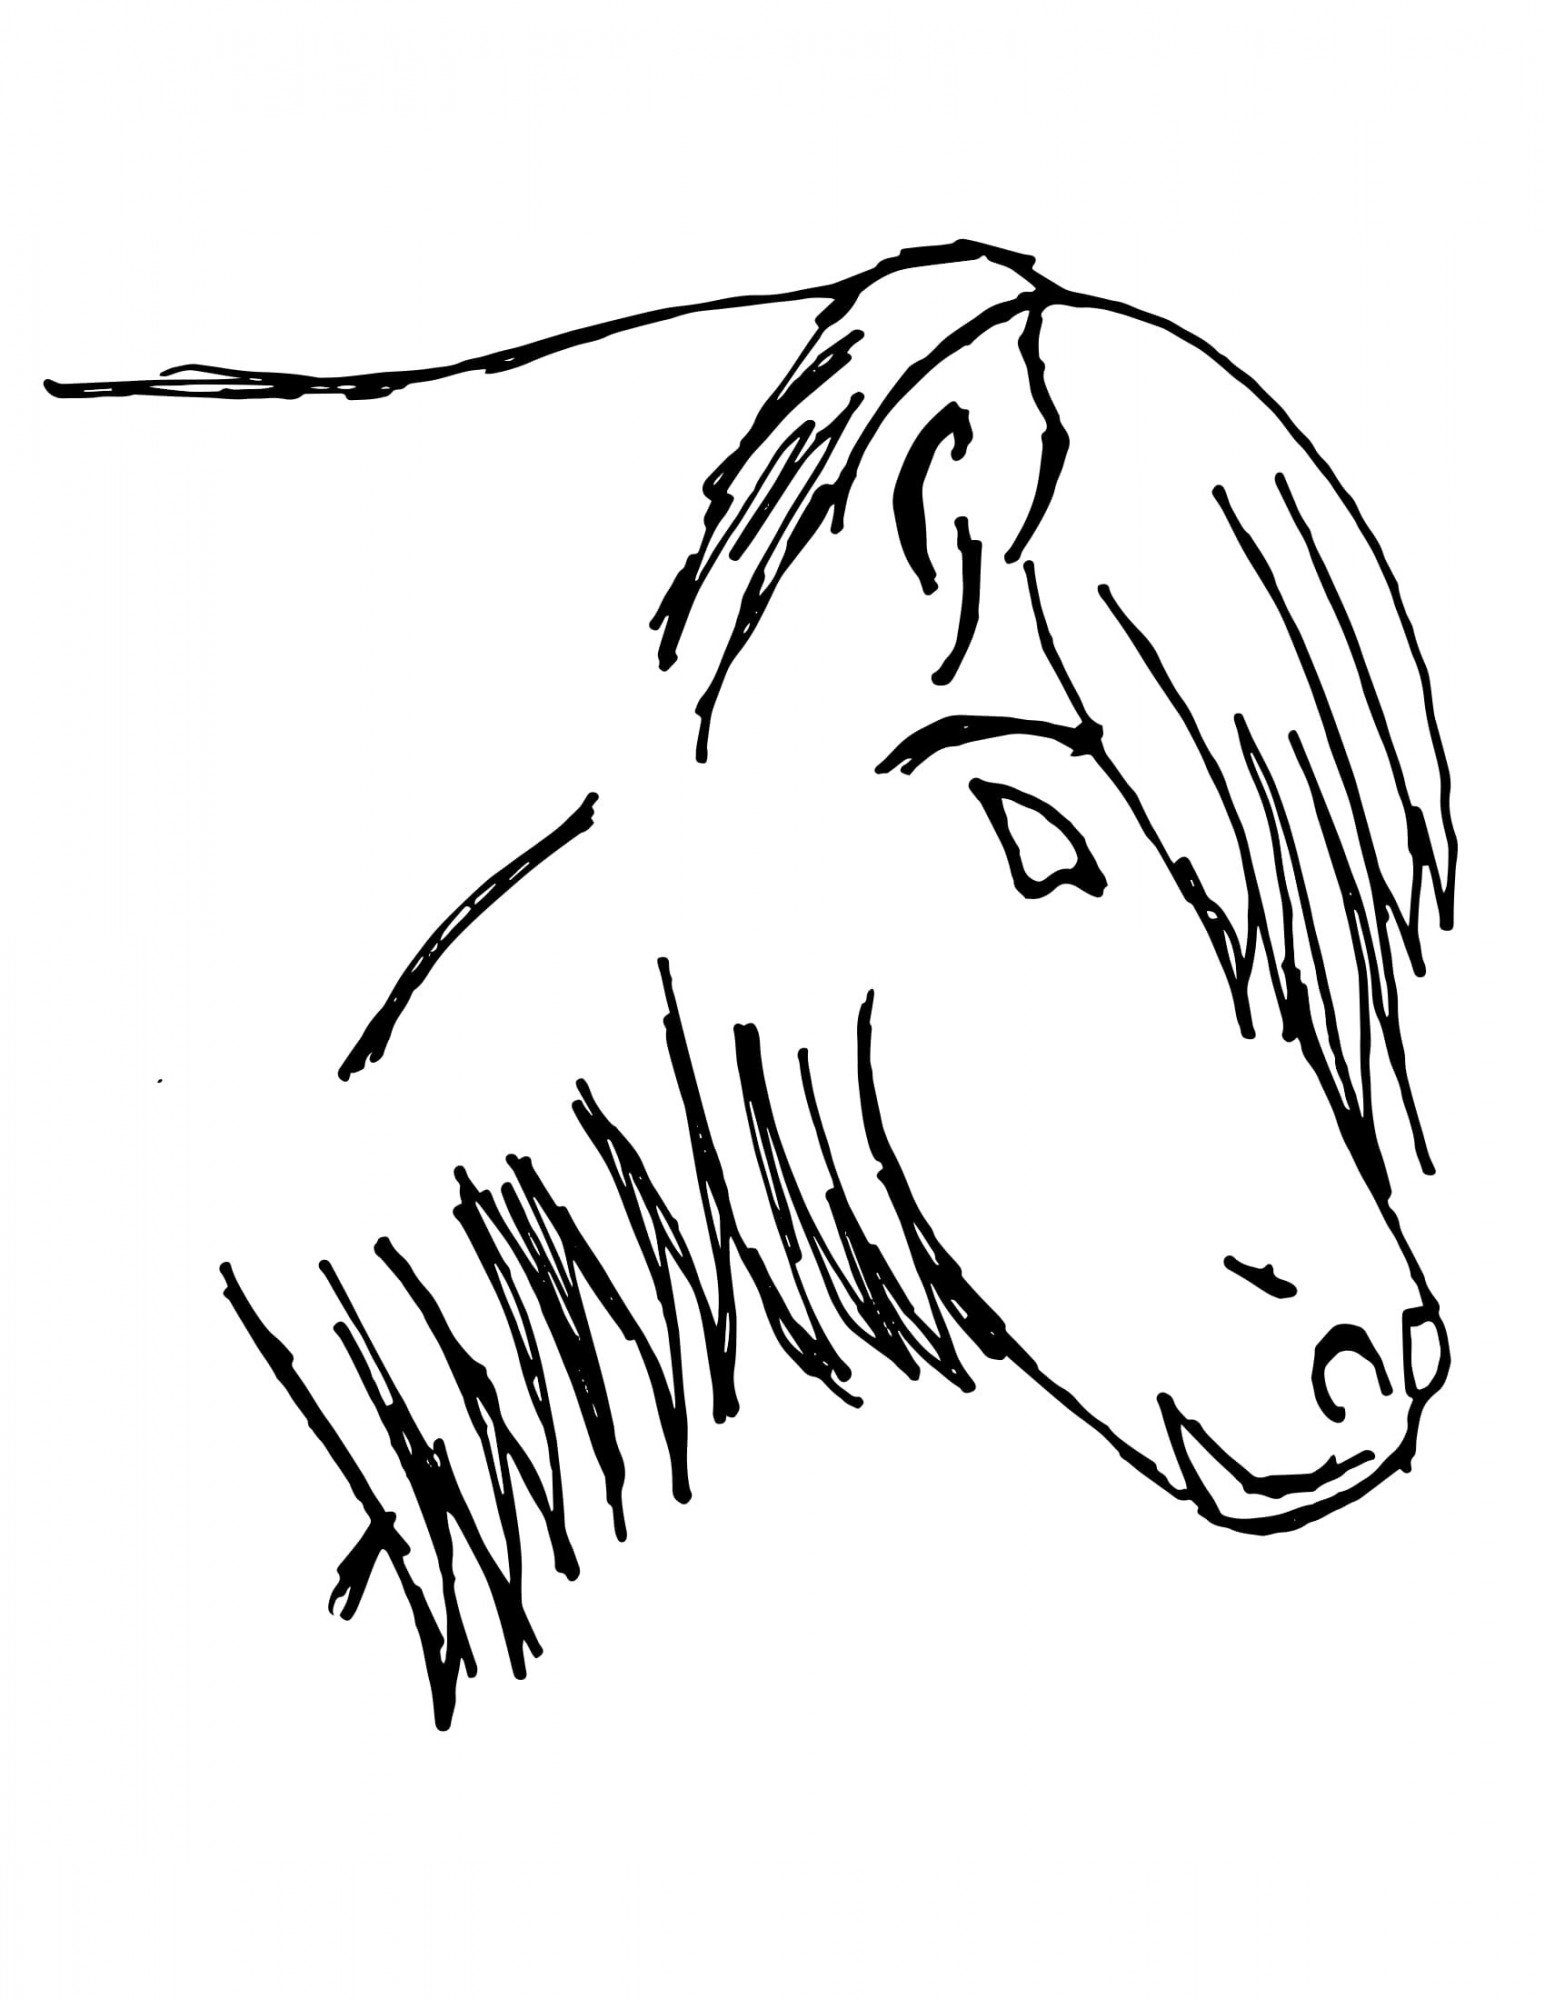 Horse "Maple" - black and white outline for coloring